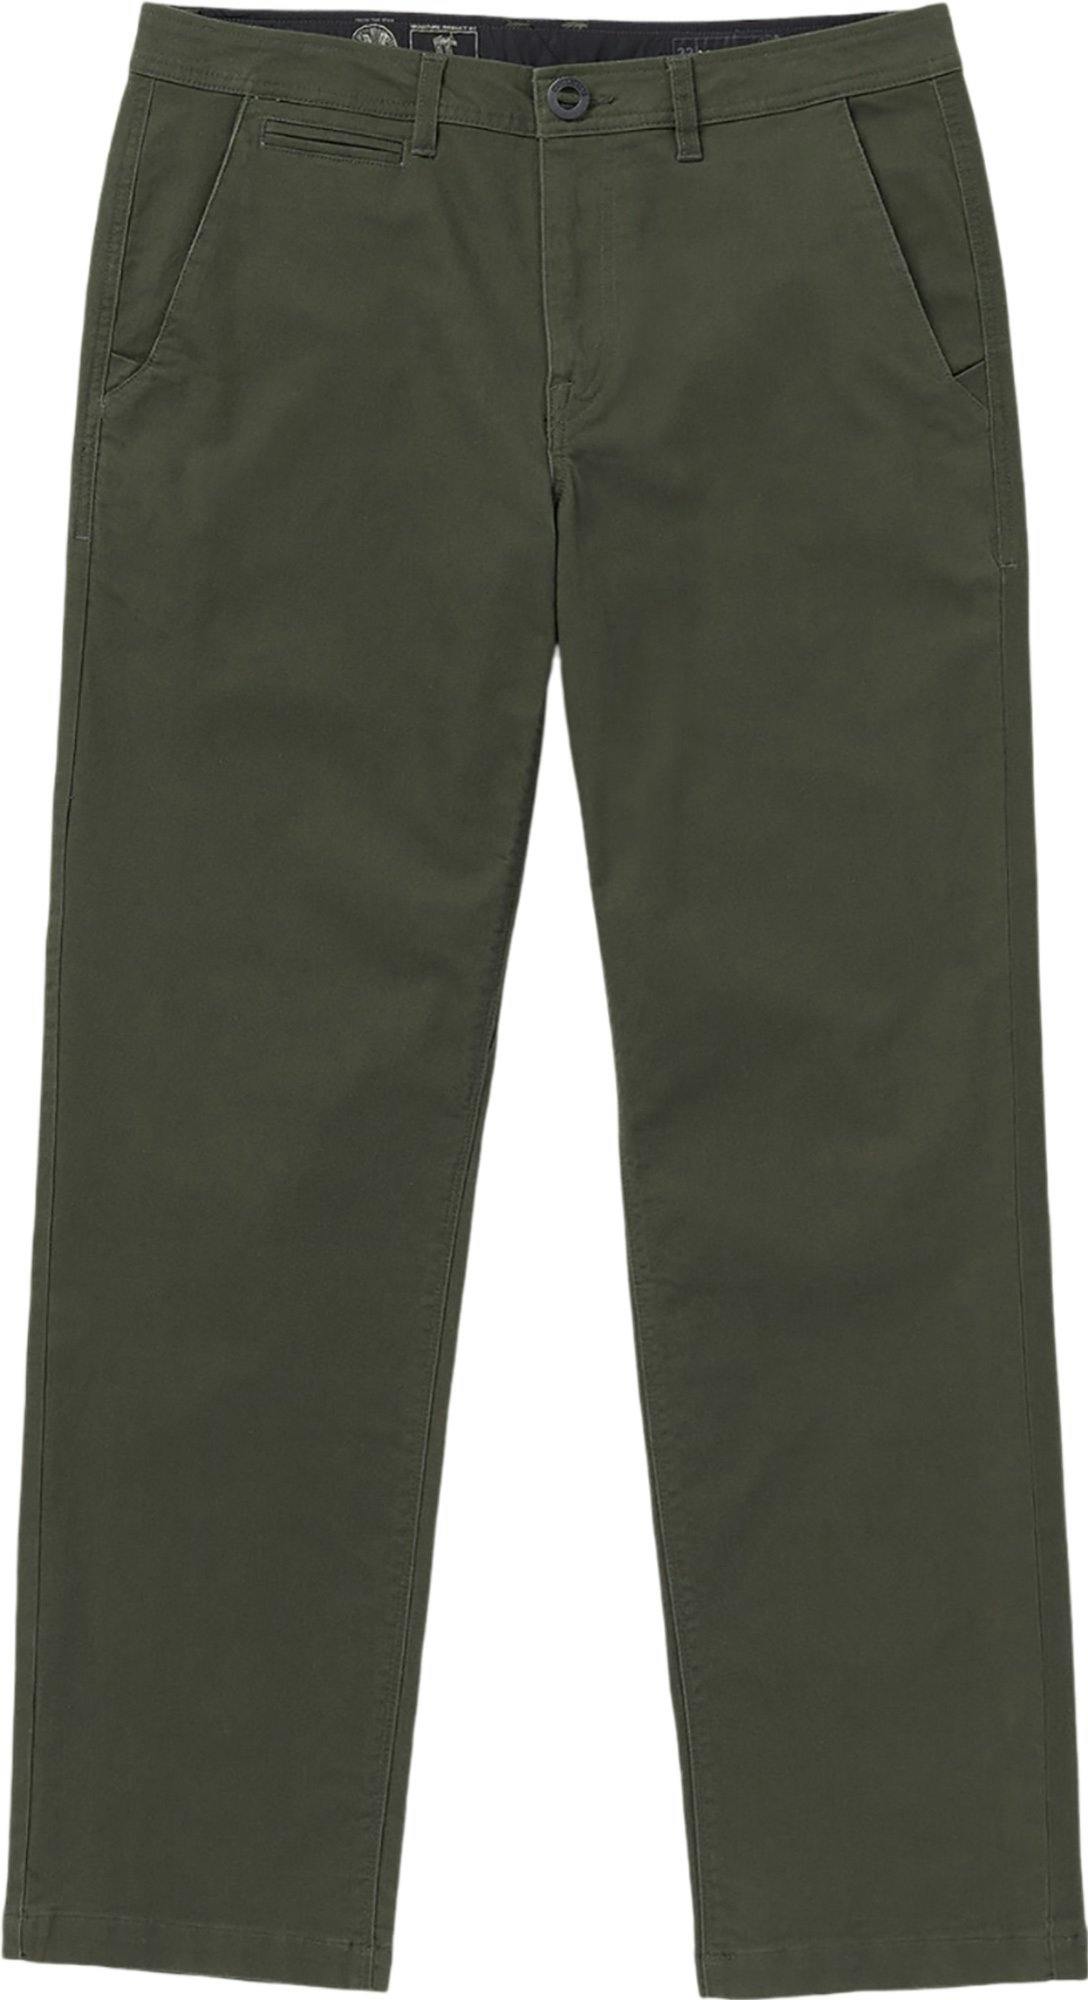 Product image for Skate Vitals Grant Taylor Pant - Men's